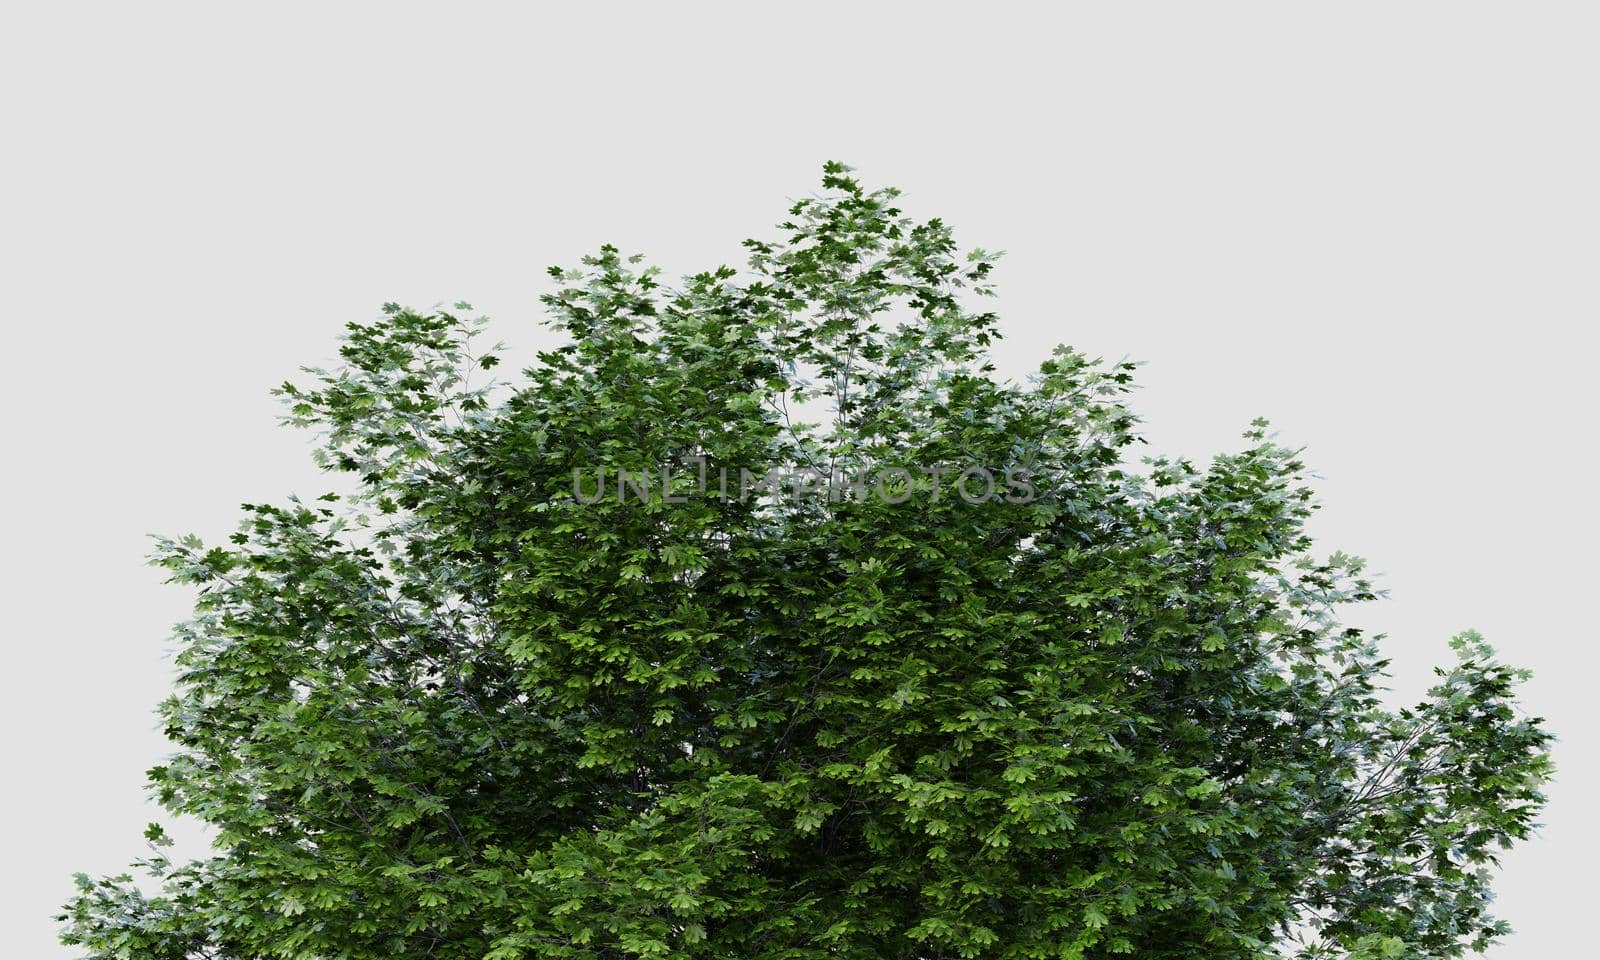 Treetop of big Acer marcophillum tree on isolated white background. Nature and object concept. 3D illustration rendering